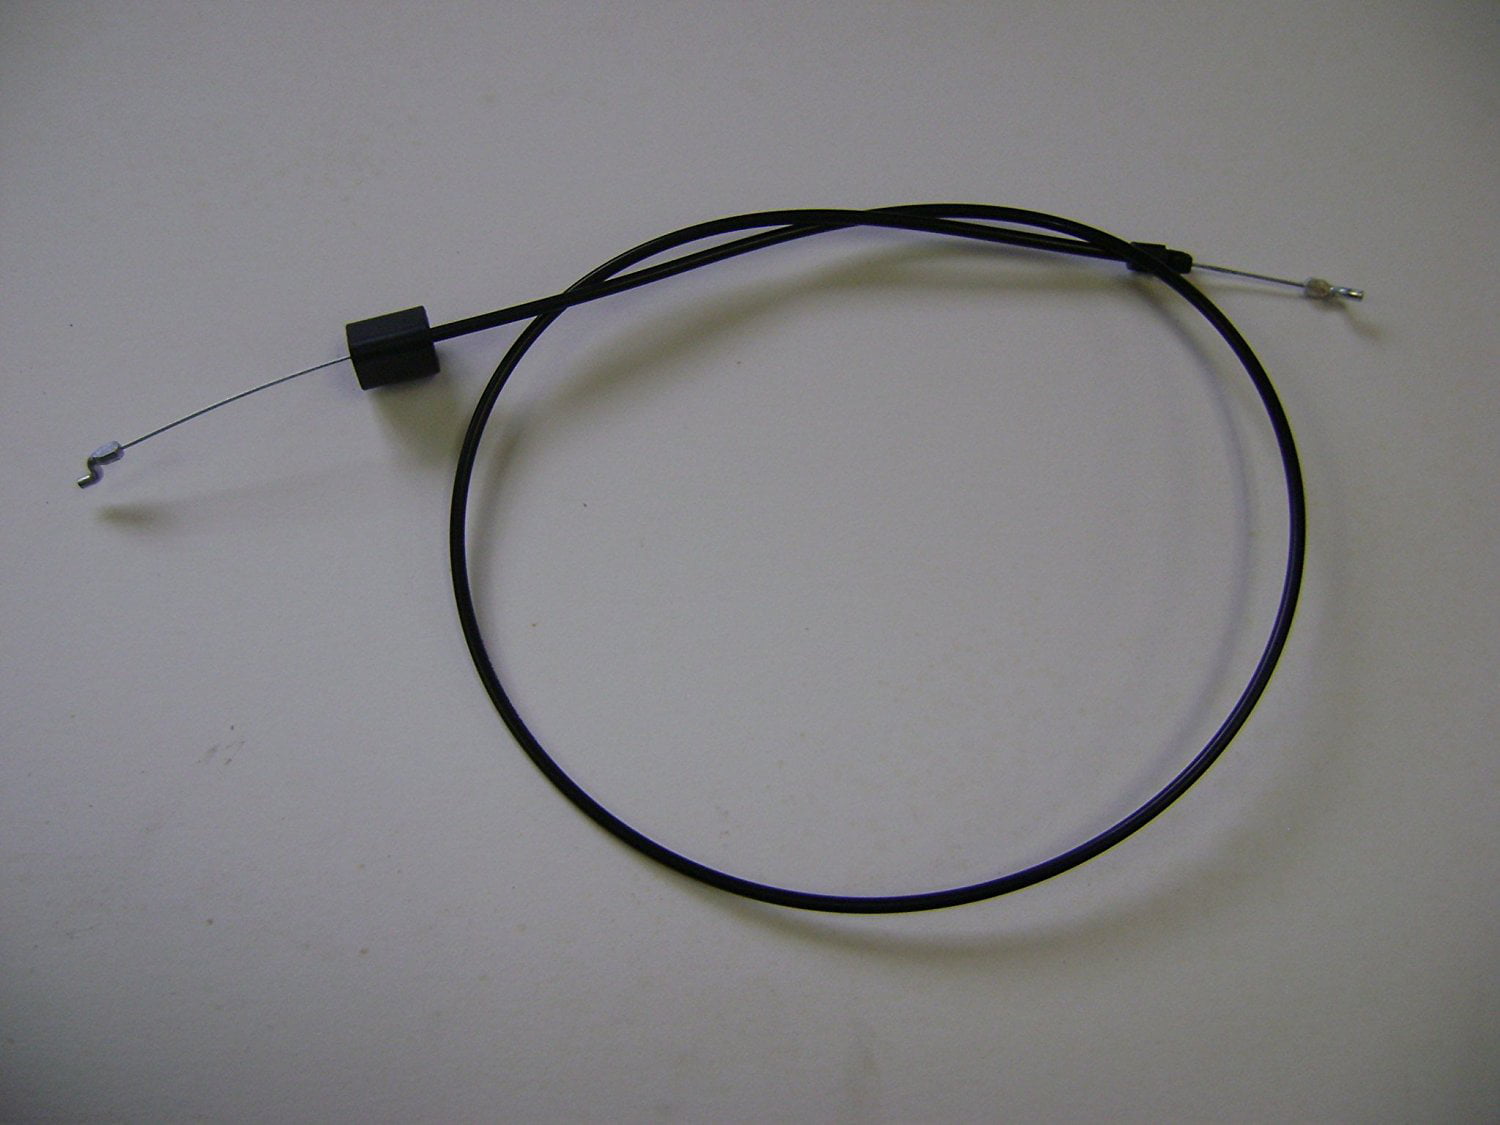 EXCELLENT QUALITY PUSH LAWN MOWER CONTROL CABLE MTD 746-1130 946-1130 CBL-3 